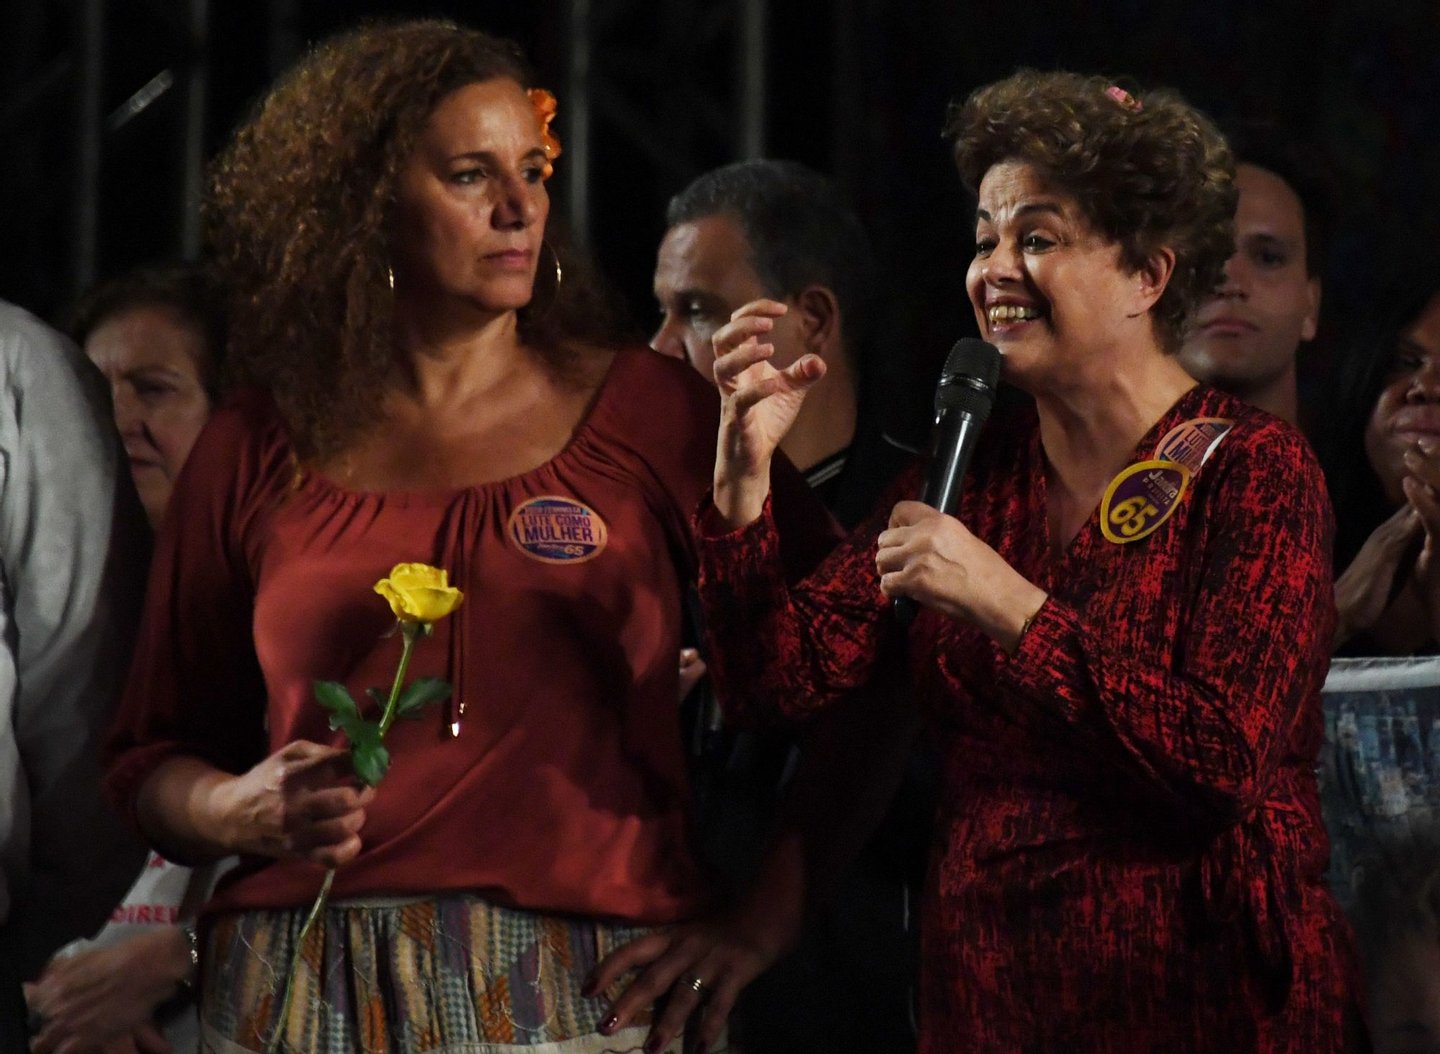 Former Brazilian president Dilma Rousseff (R) delivers a speech to supporters in Rio de Janeiro on September 21, 2016 during a campaign rally for Jandira Feghali (L), Communist Party candidate for mayor of Rio de Janeiro. / AFP / VANDERLEI ALMEIDA (Photo credit should read VANDERLEI ALMEIDA/AFP/Getty Images)